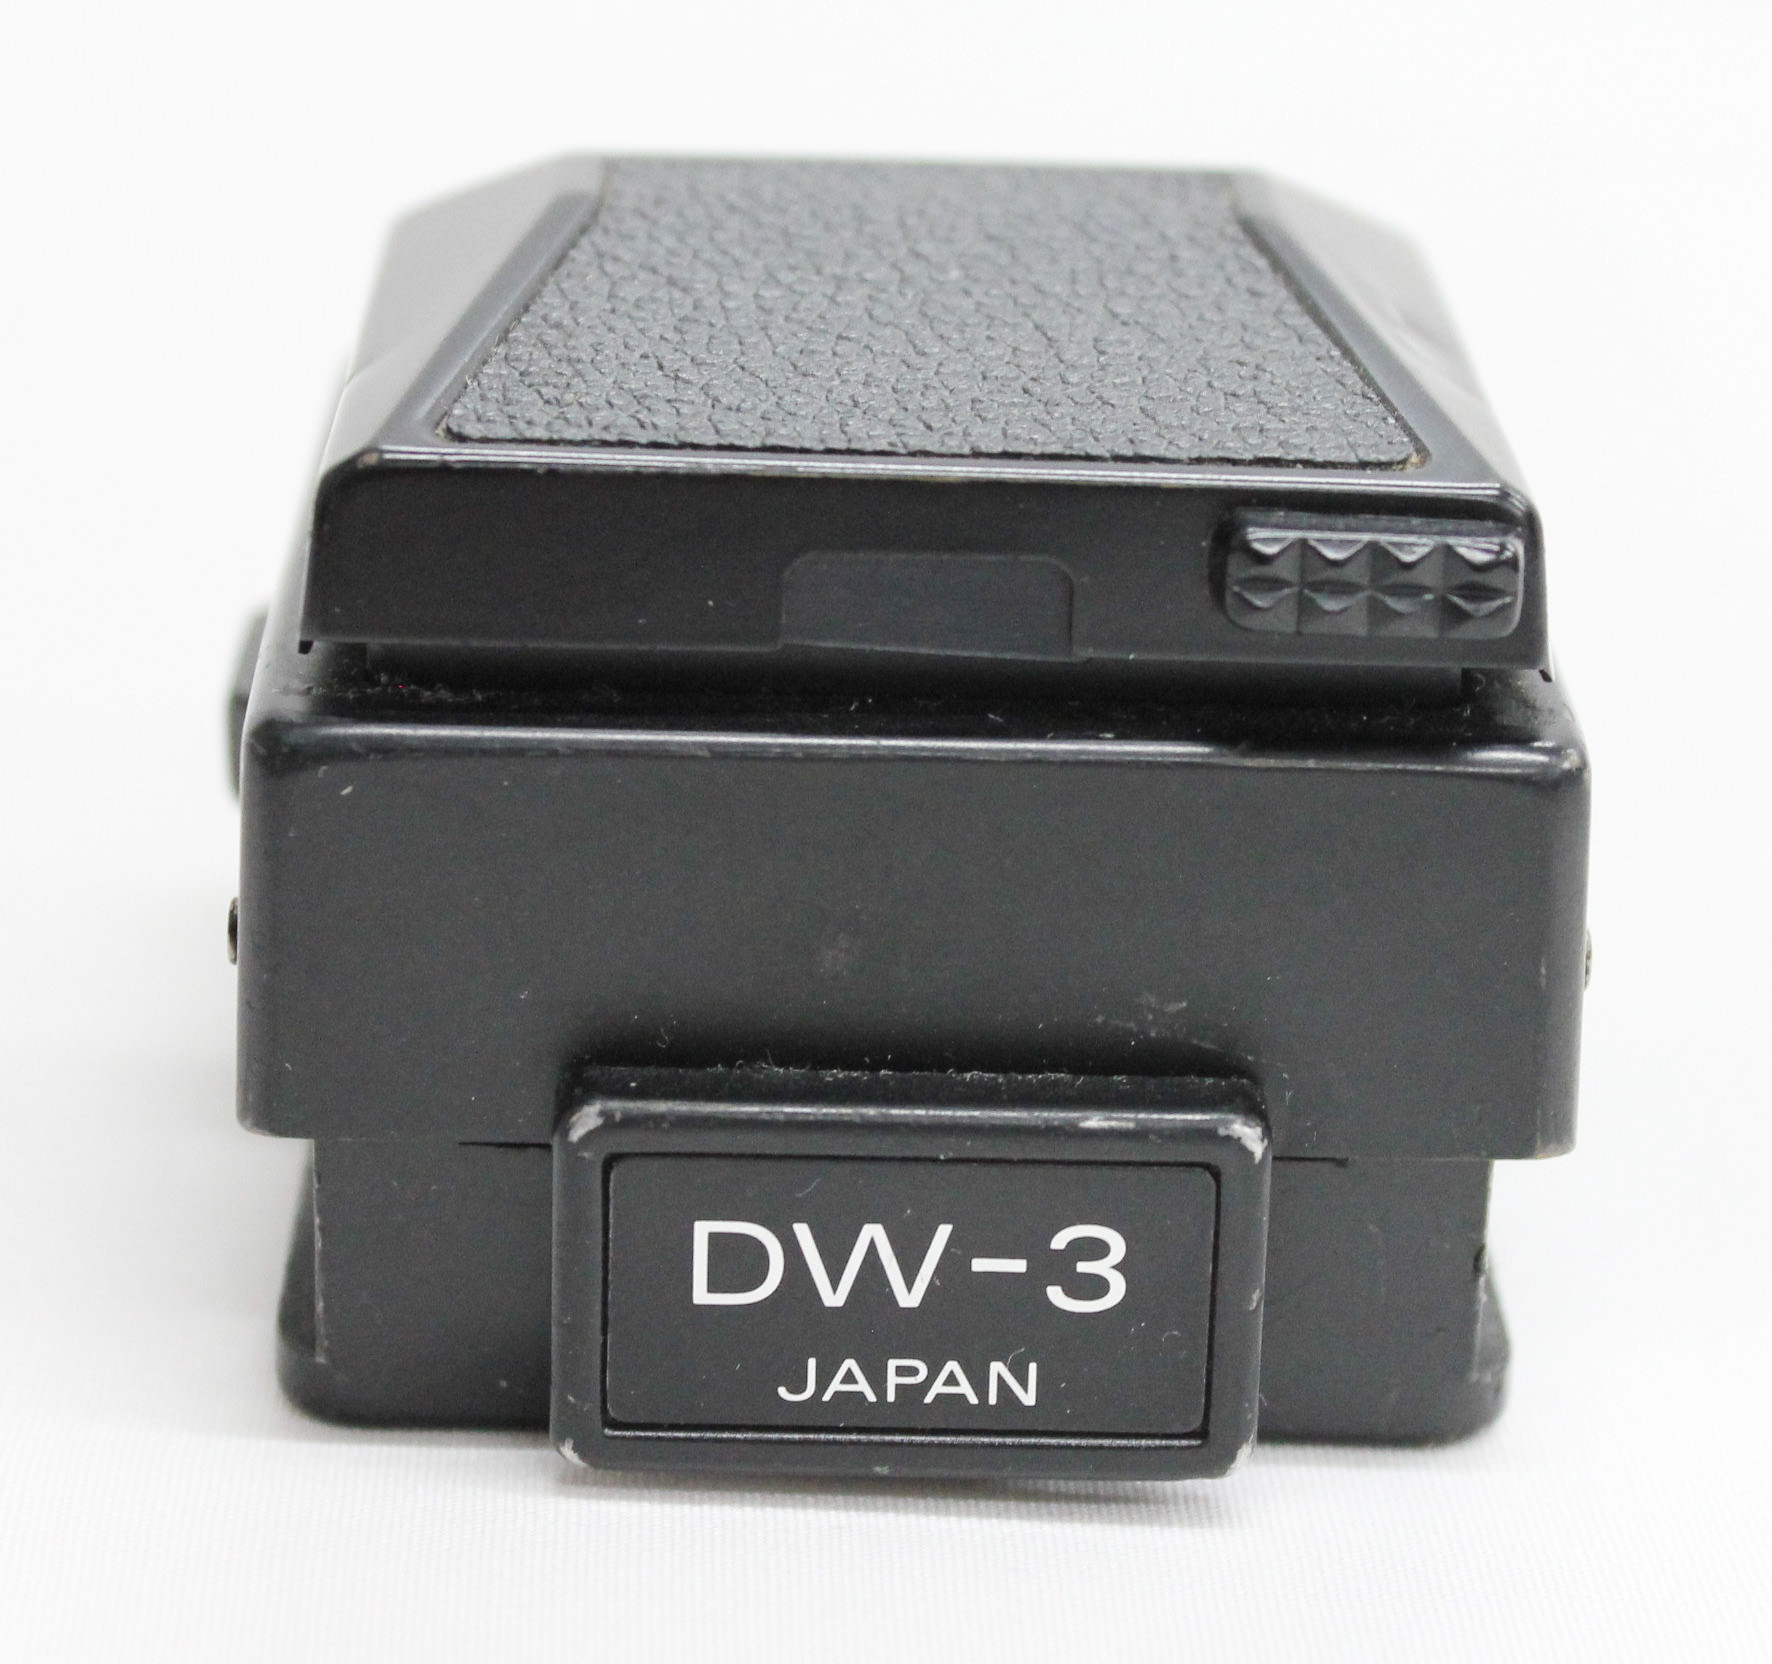 [Excellent++++] Nikon DW-3 Waist Level Finder for F3 from Japan